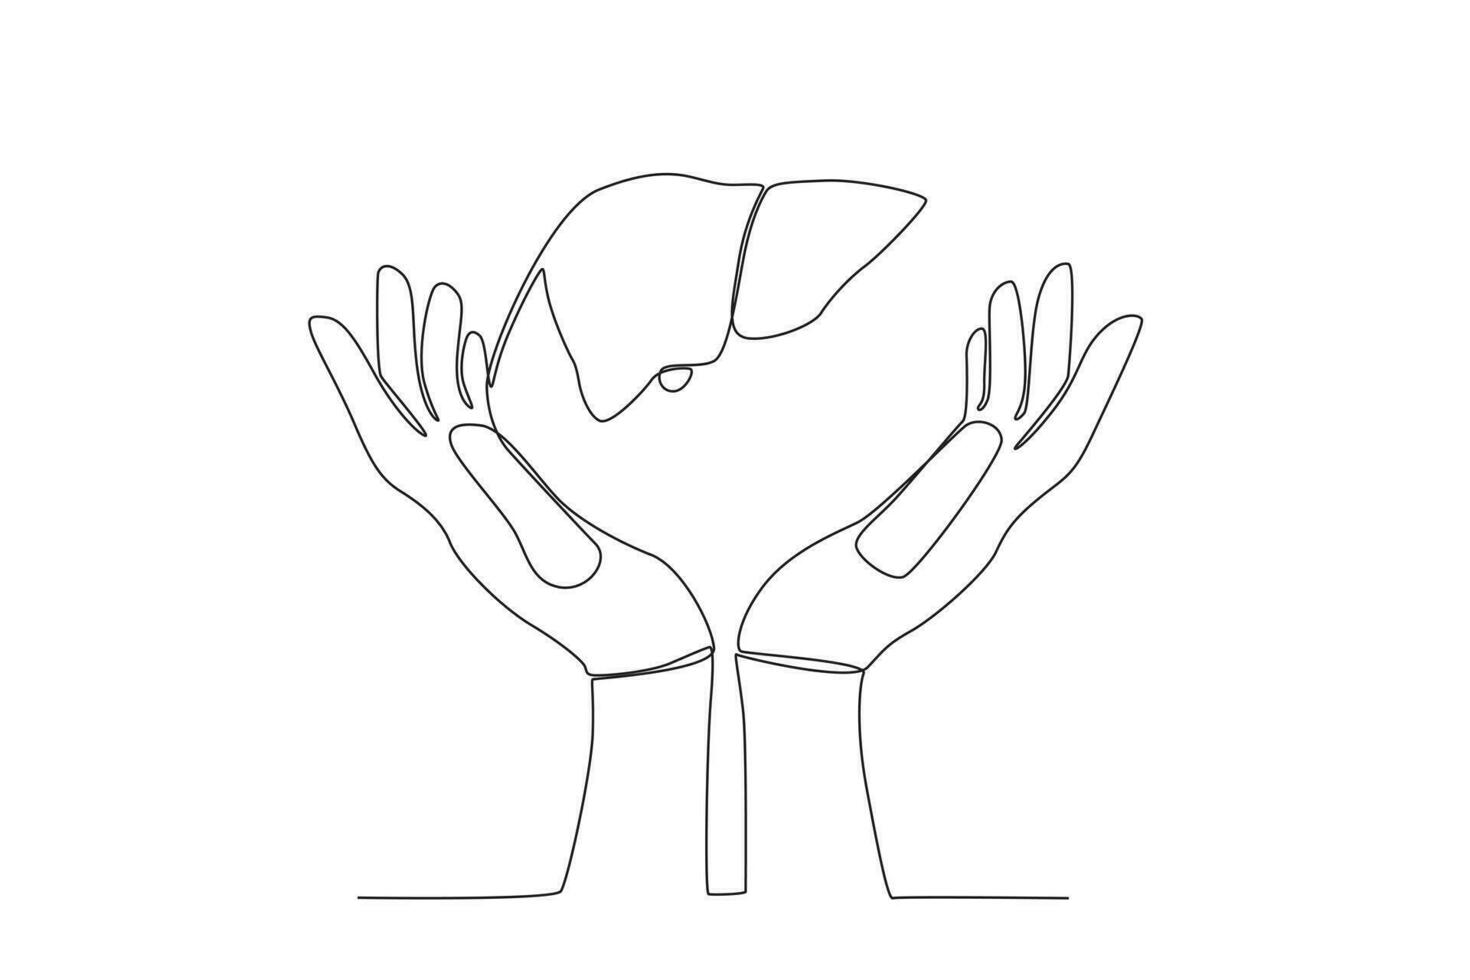 continuing the vector lines of the world hepatitis day concept for hands and hearts